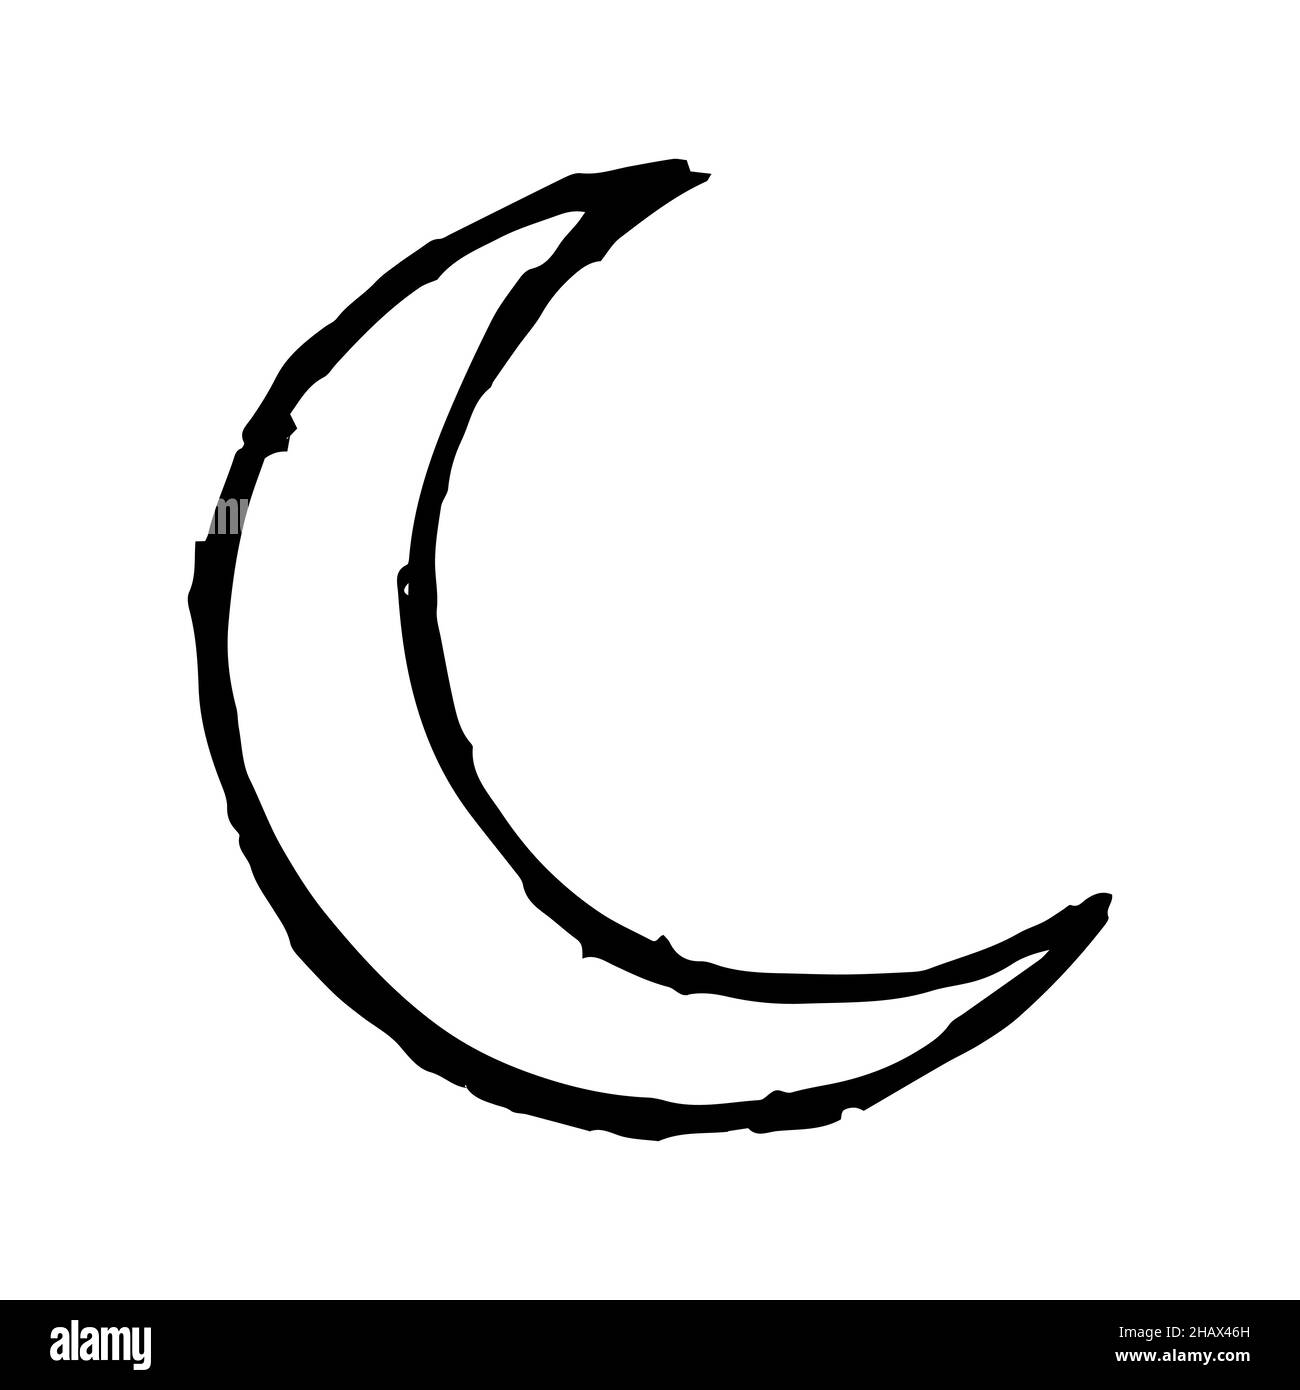 Crescent drawing icon. Hand drawn moon sign. Vector eps sketch isolated astronomy symbol Stock Vector